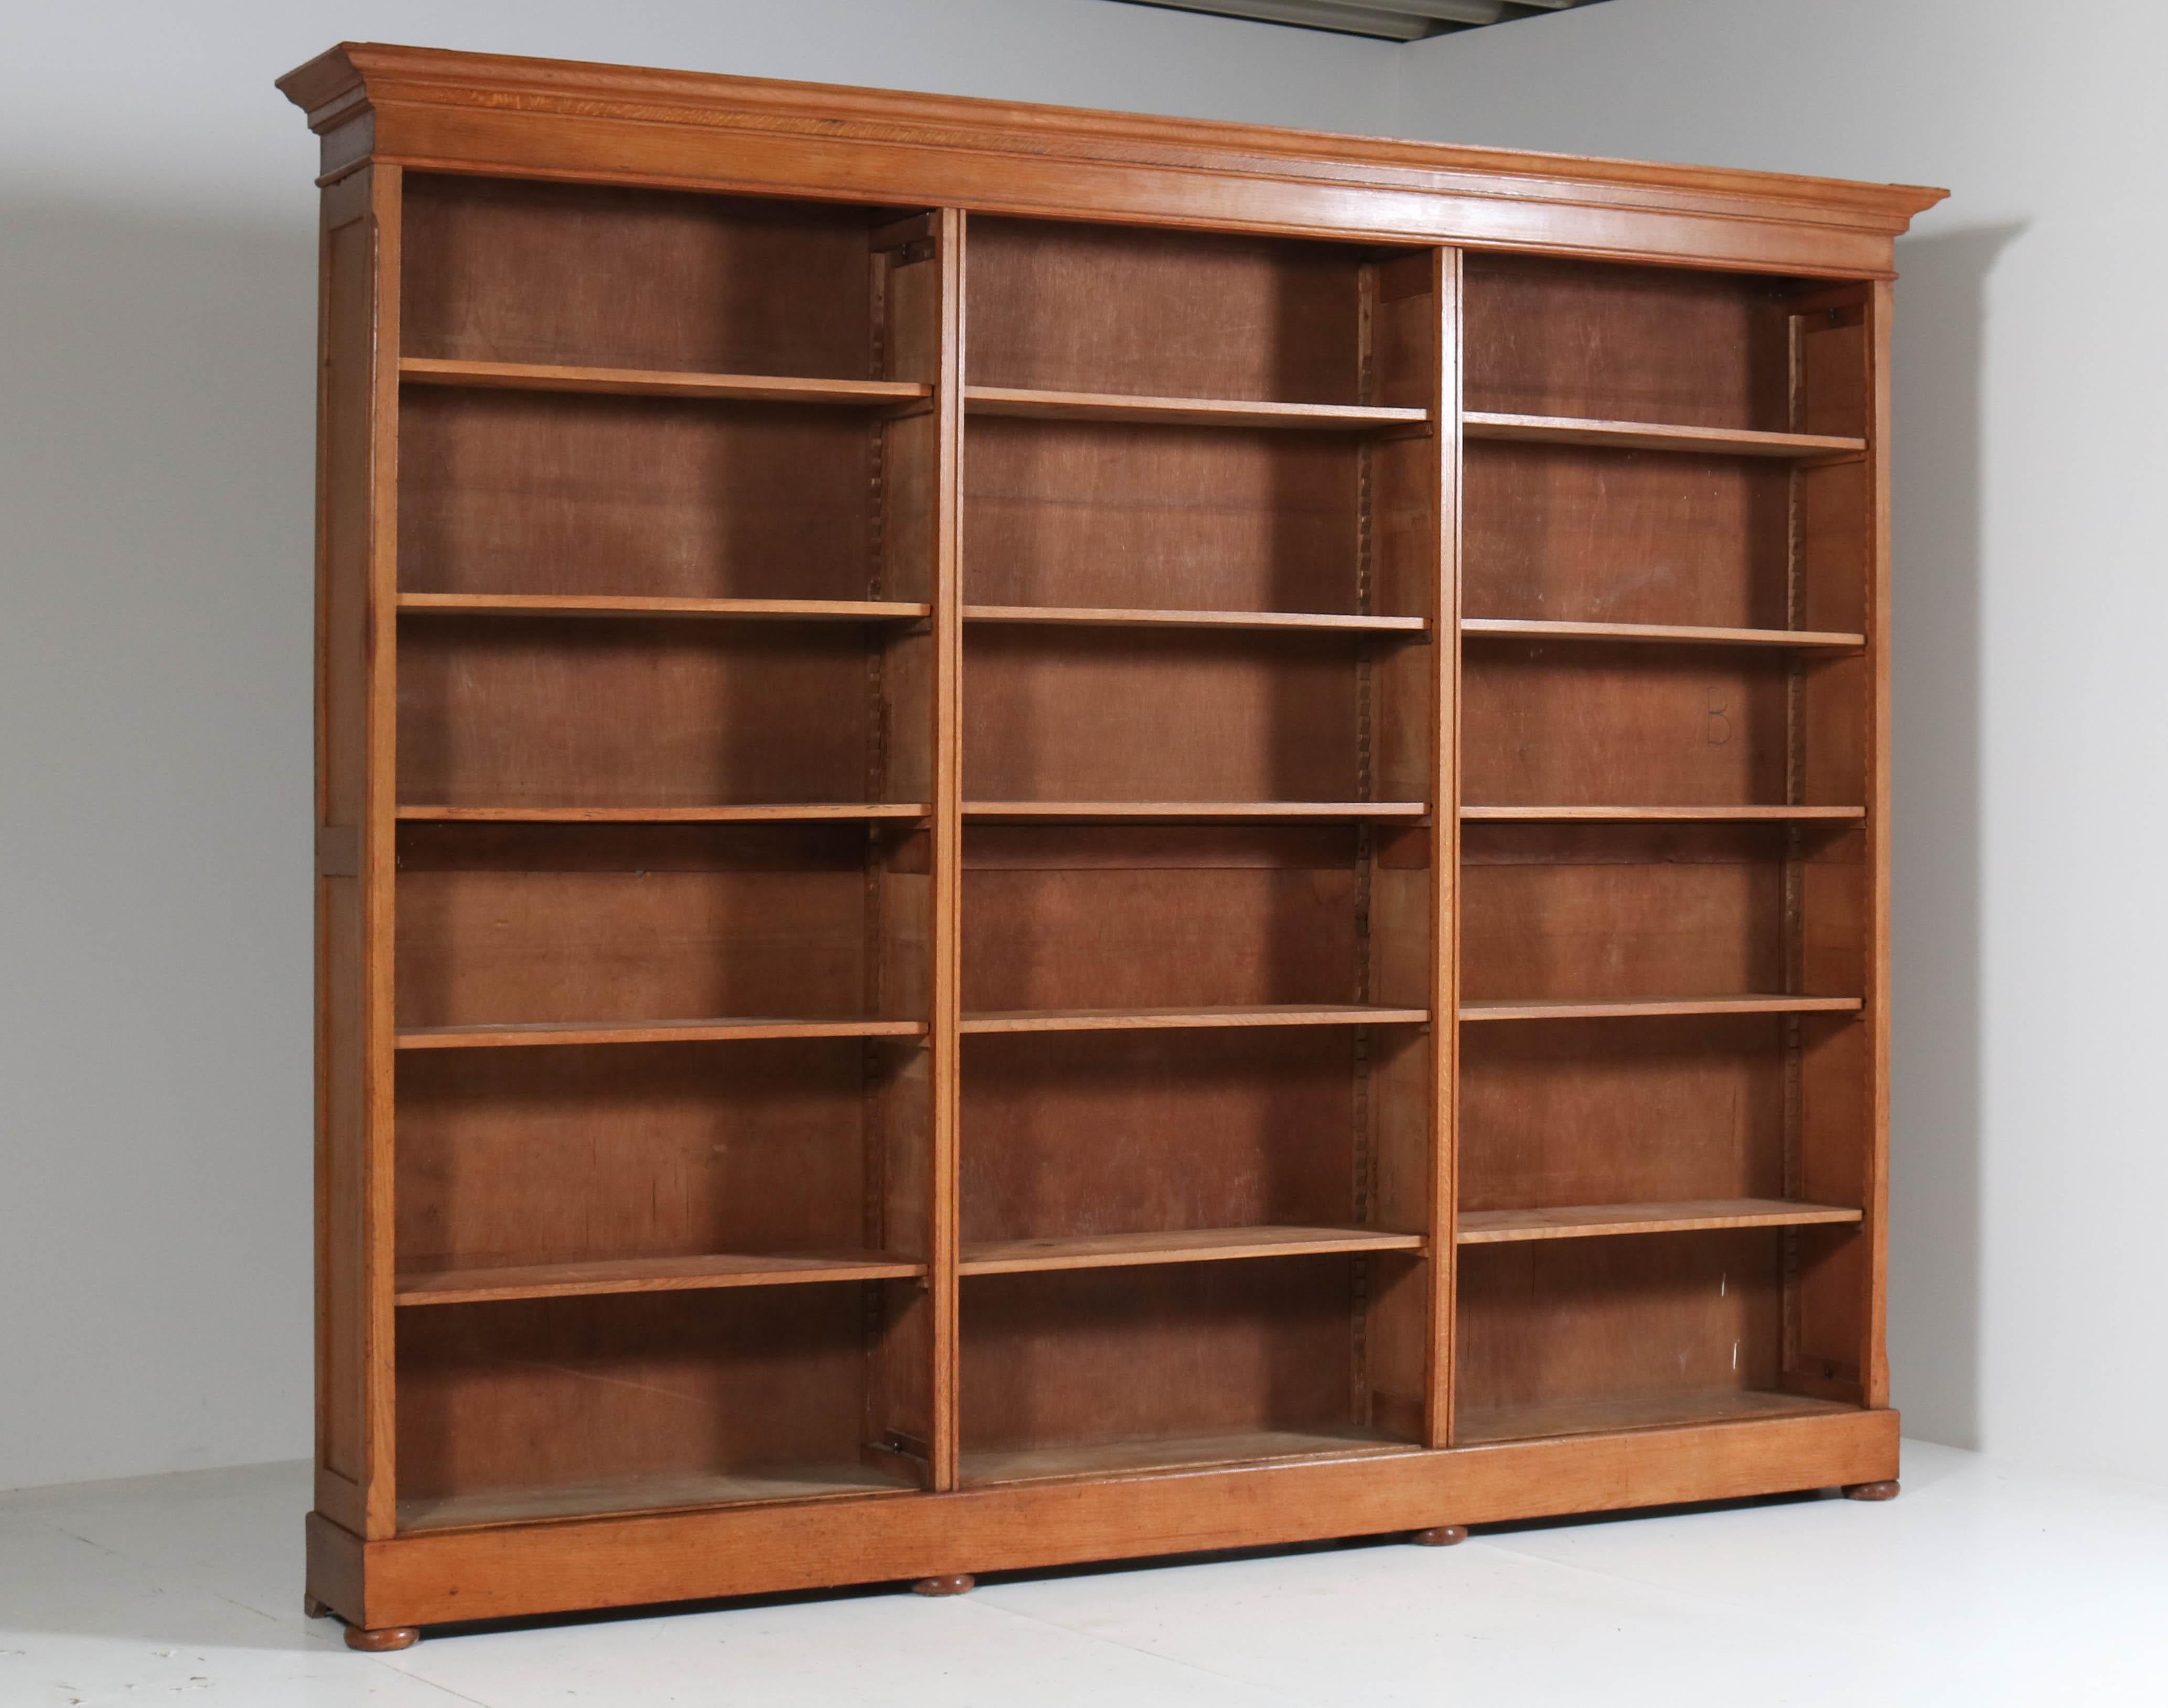 Wonderful and rare extra large library open bookcase.
Rare because of its size, 315 cm or 124.02 in wide!
Measures: Height 252 cm or 99.21 in., depth 38 cm or 14.96 in.
Solid oak with fifteen original wooden shelves, adjustable in height.
This